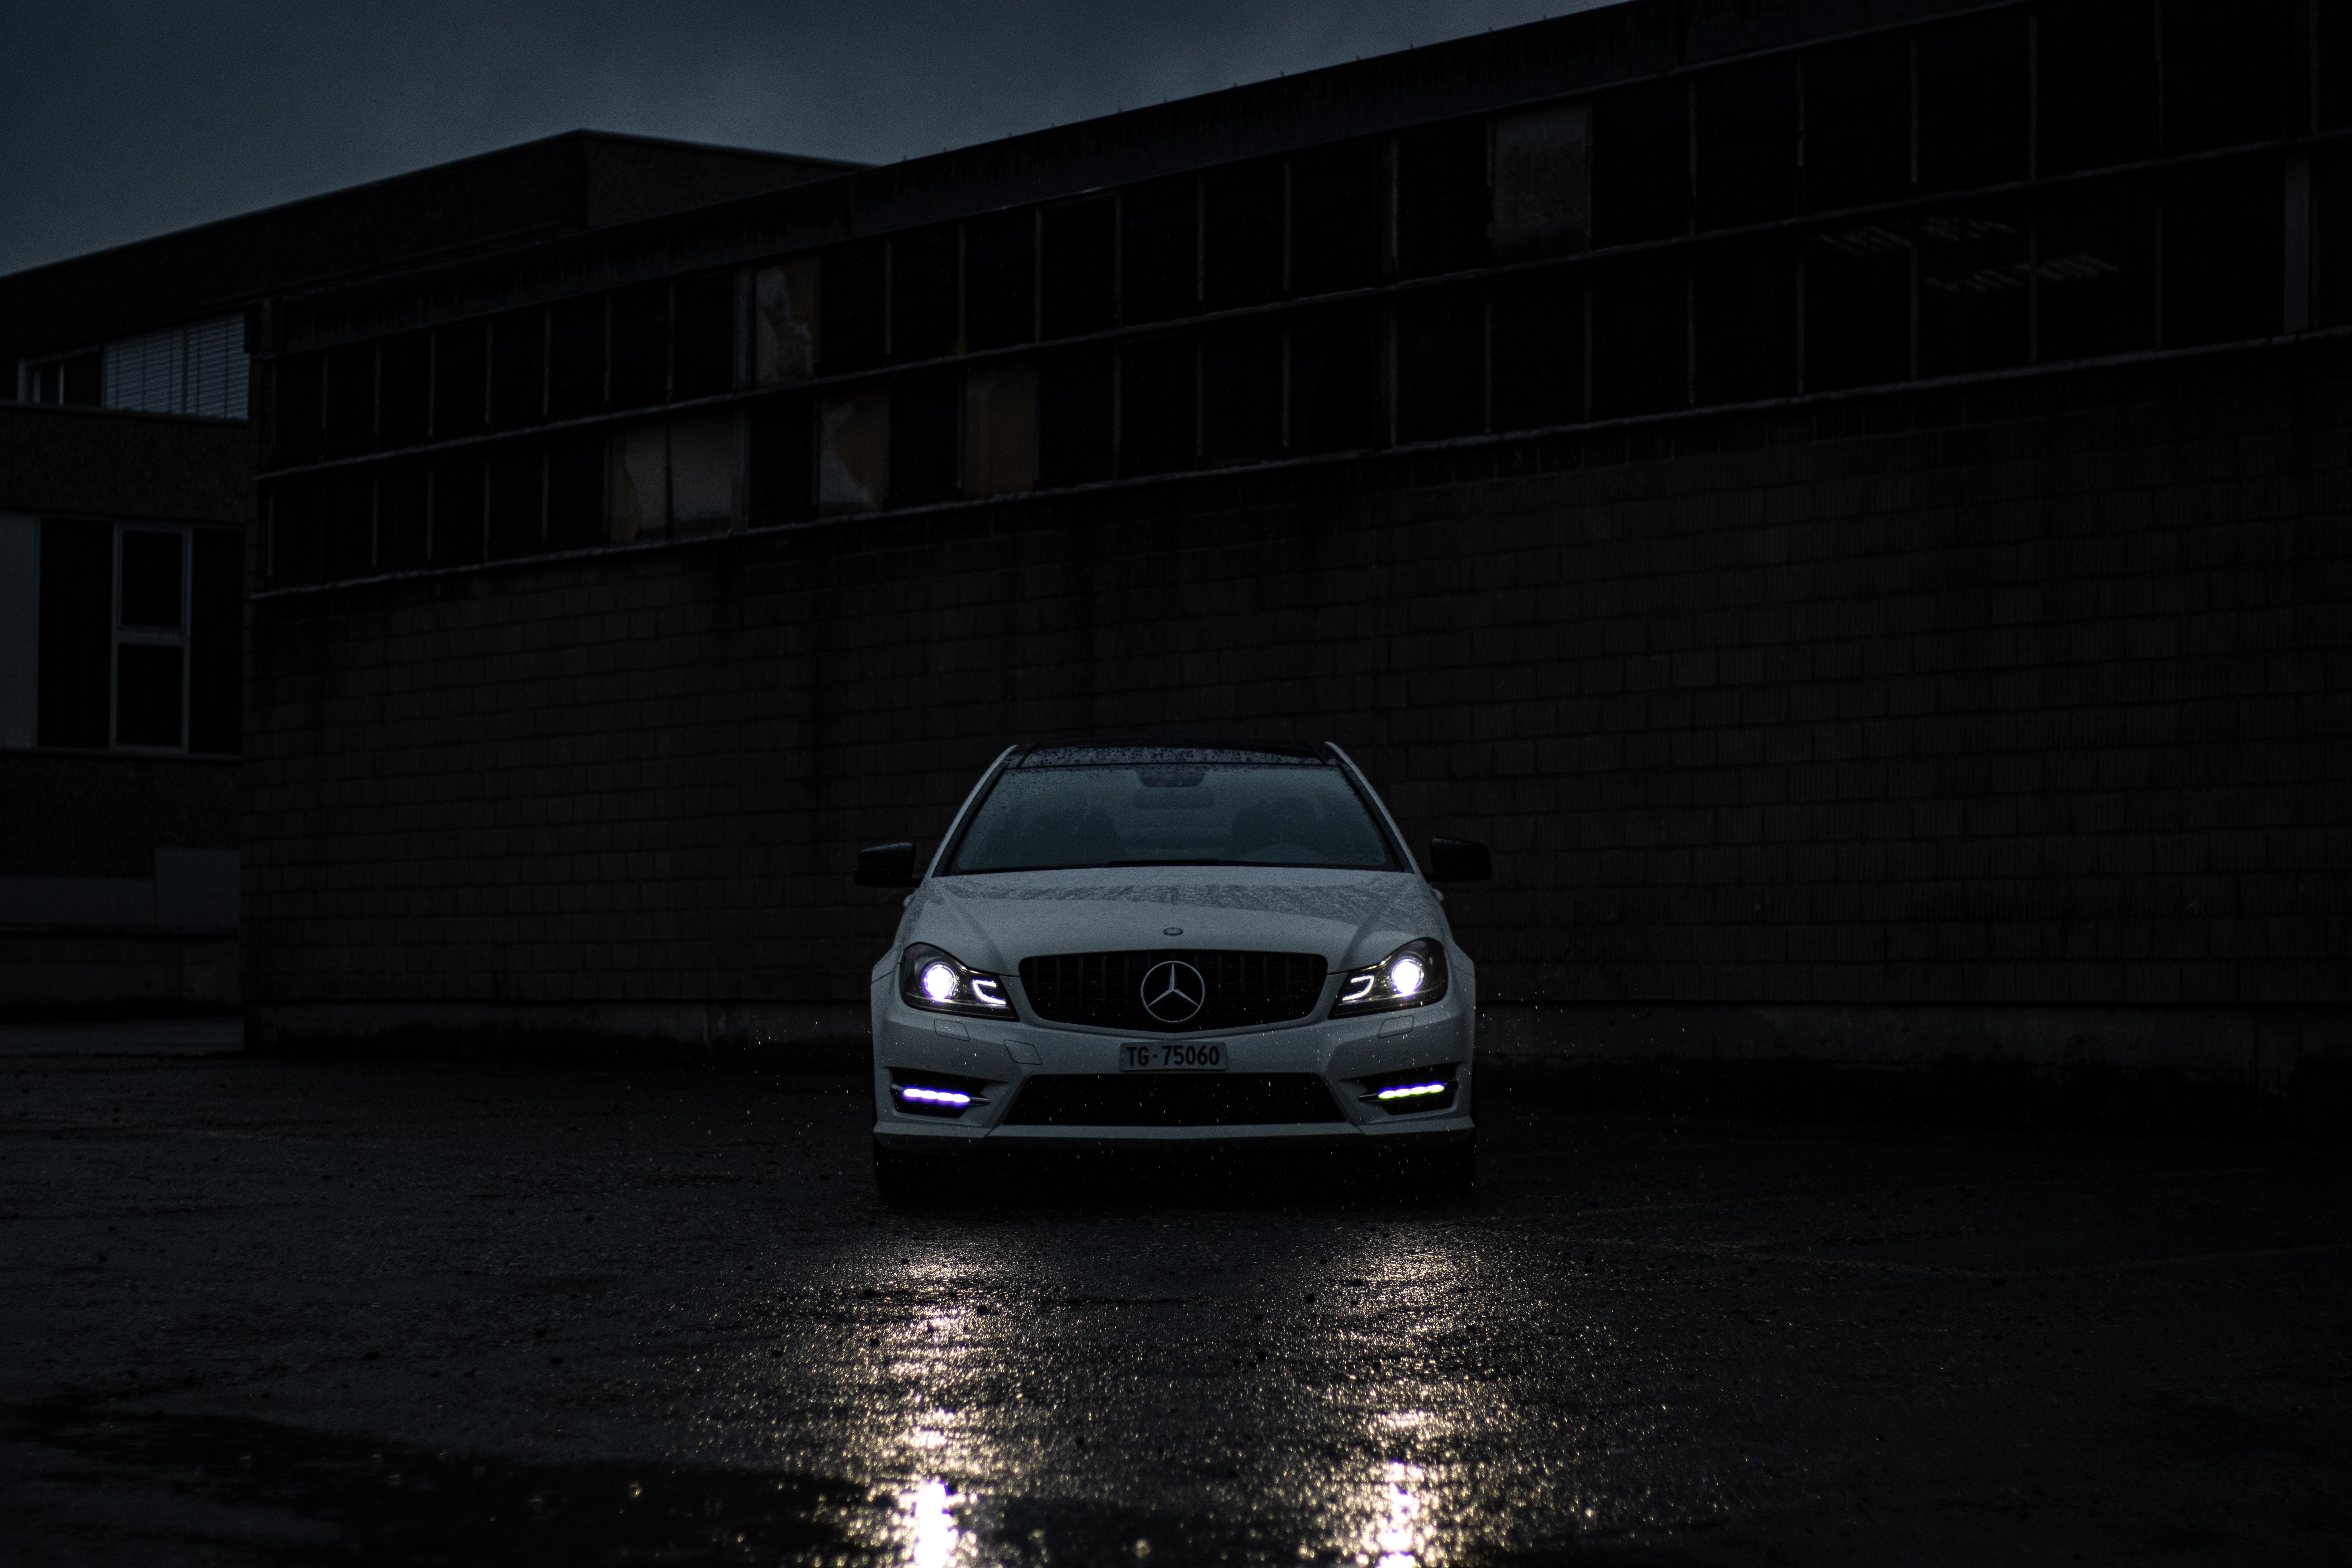 mercedes-benz, cars, white, lights, car, front view, headlights 1080p